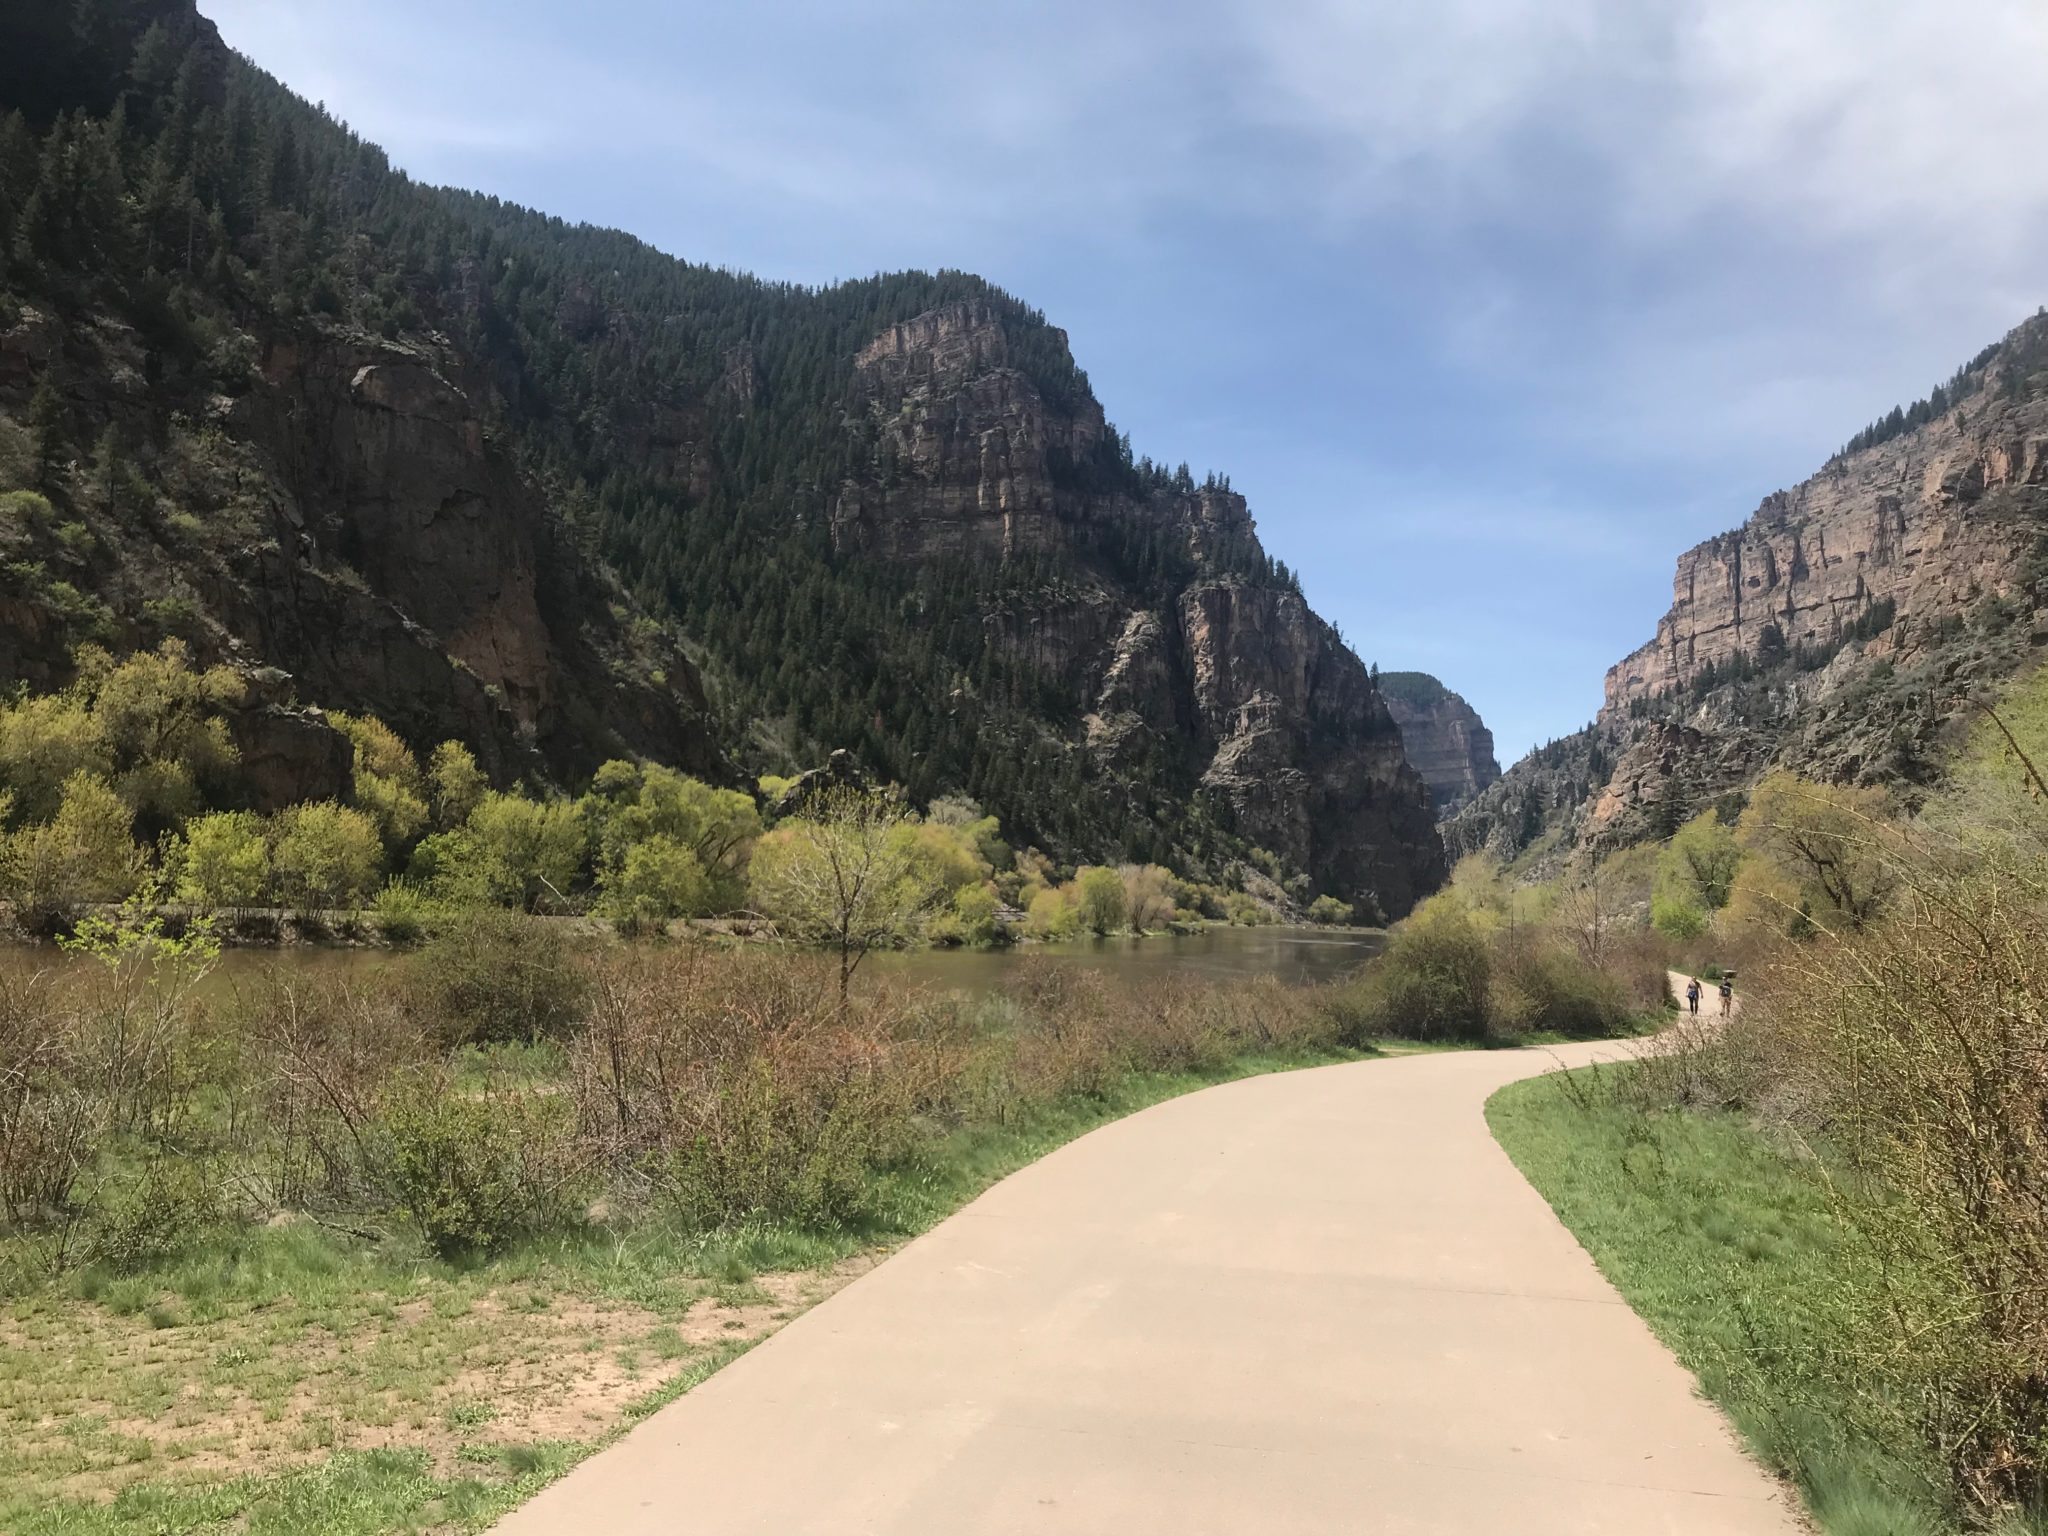 A paved trail alongside a river flowing through a canyon.